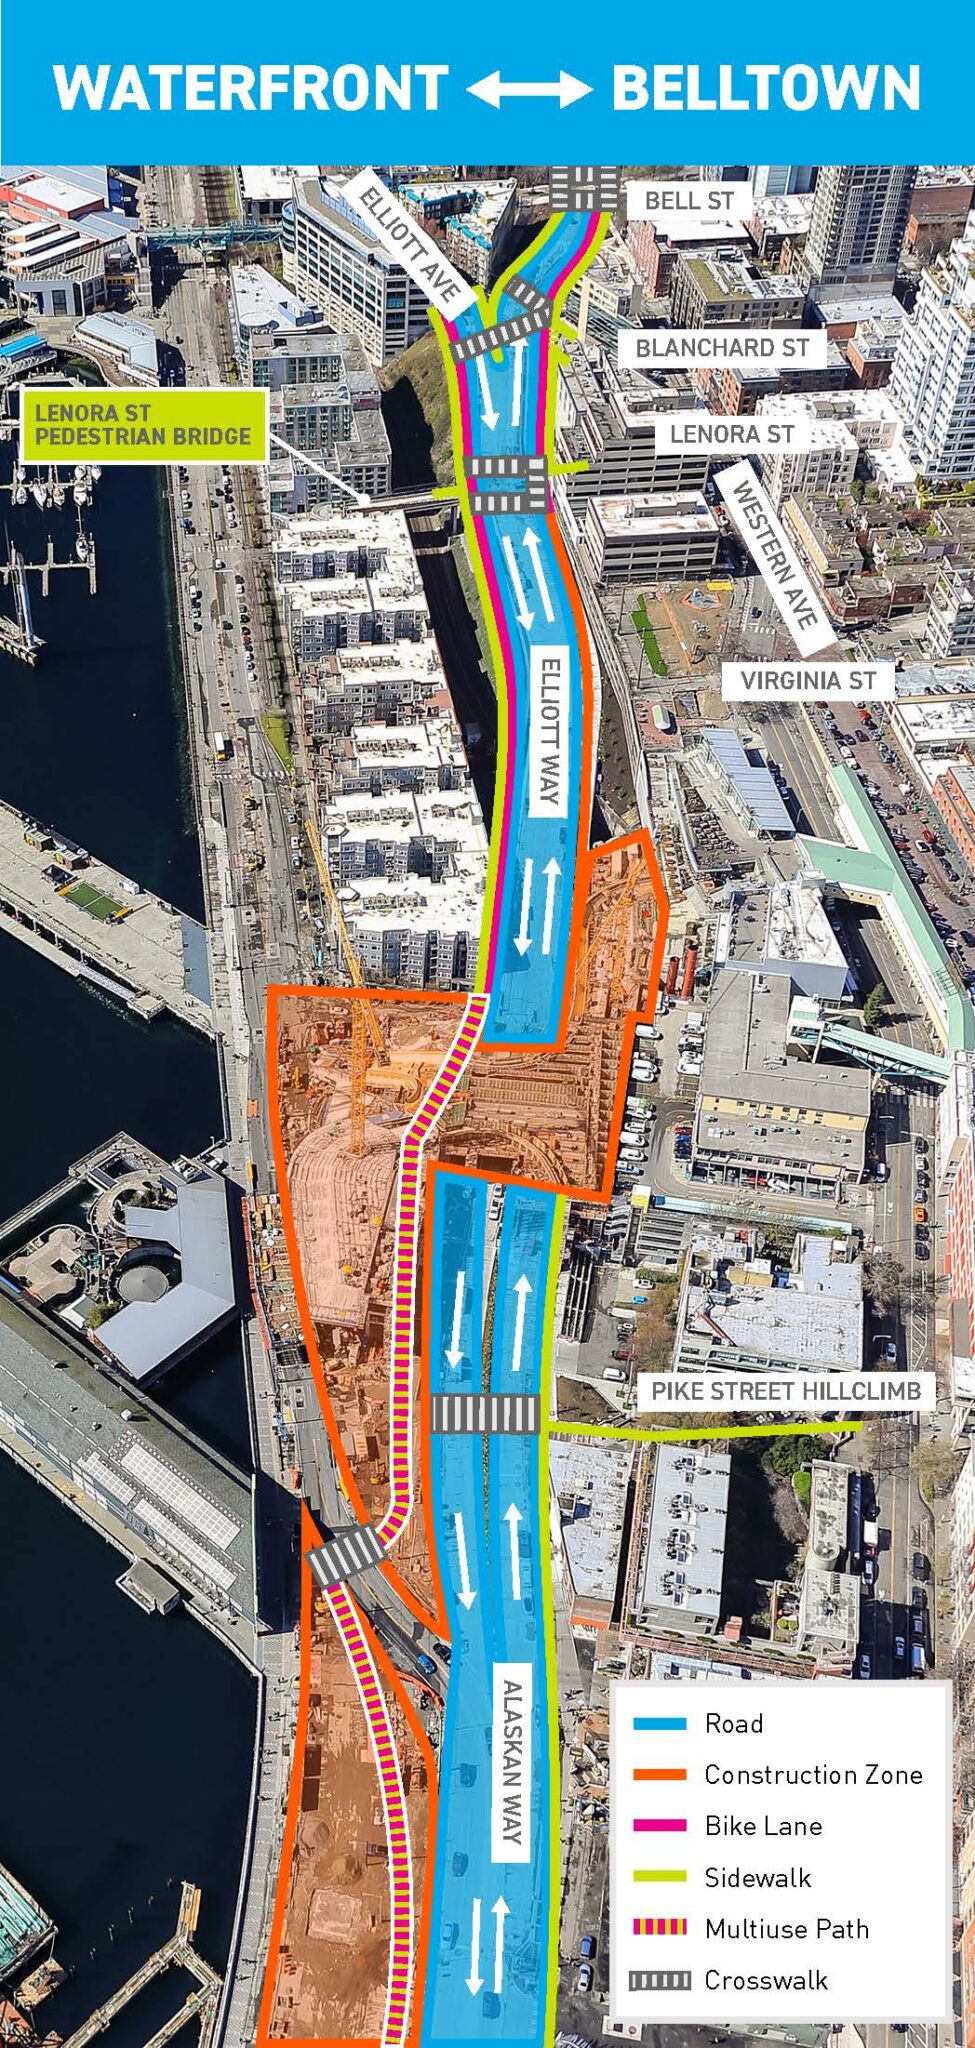 Map graphic highlighting the new Waterfront to Belltown connection, construction zone, bike lanes, sidewalks, multiuse paths, crosswalks, streets, as well as large buildings in the area.